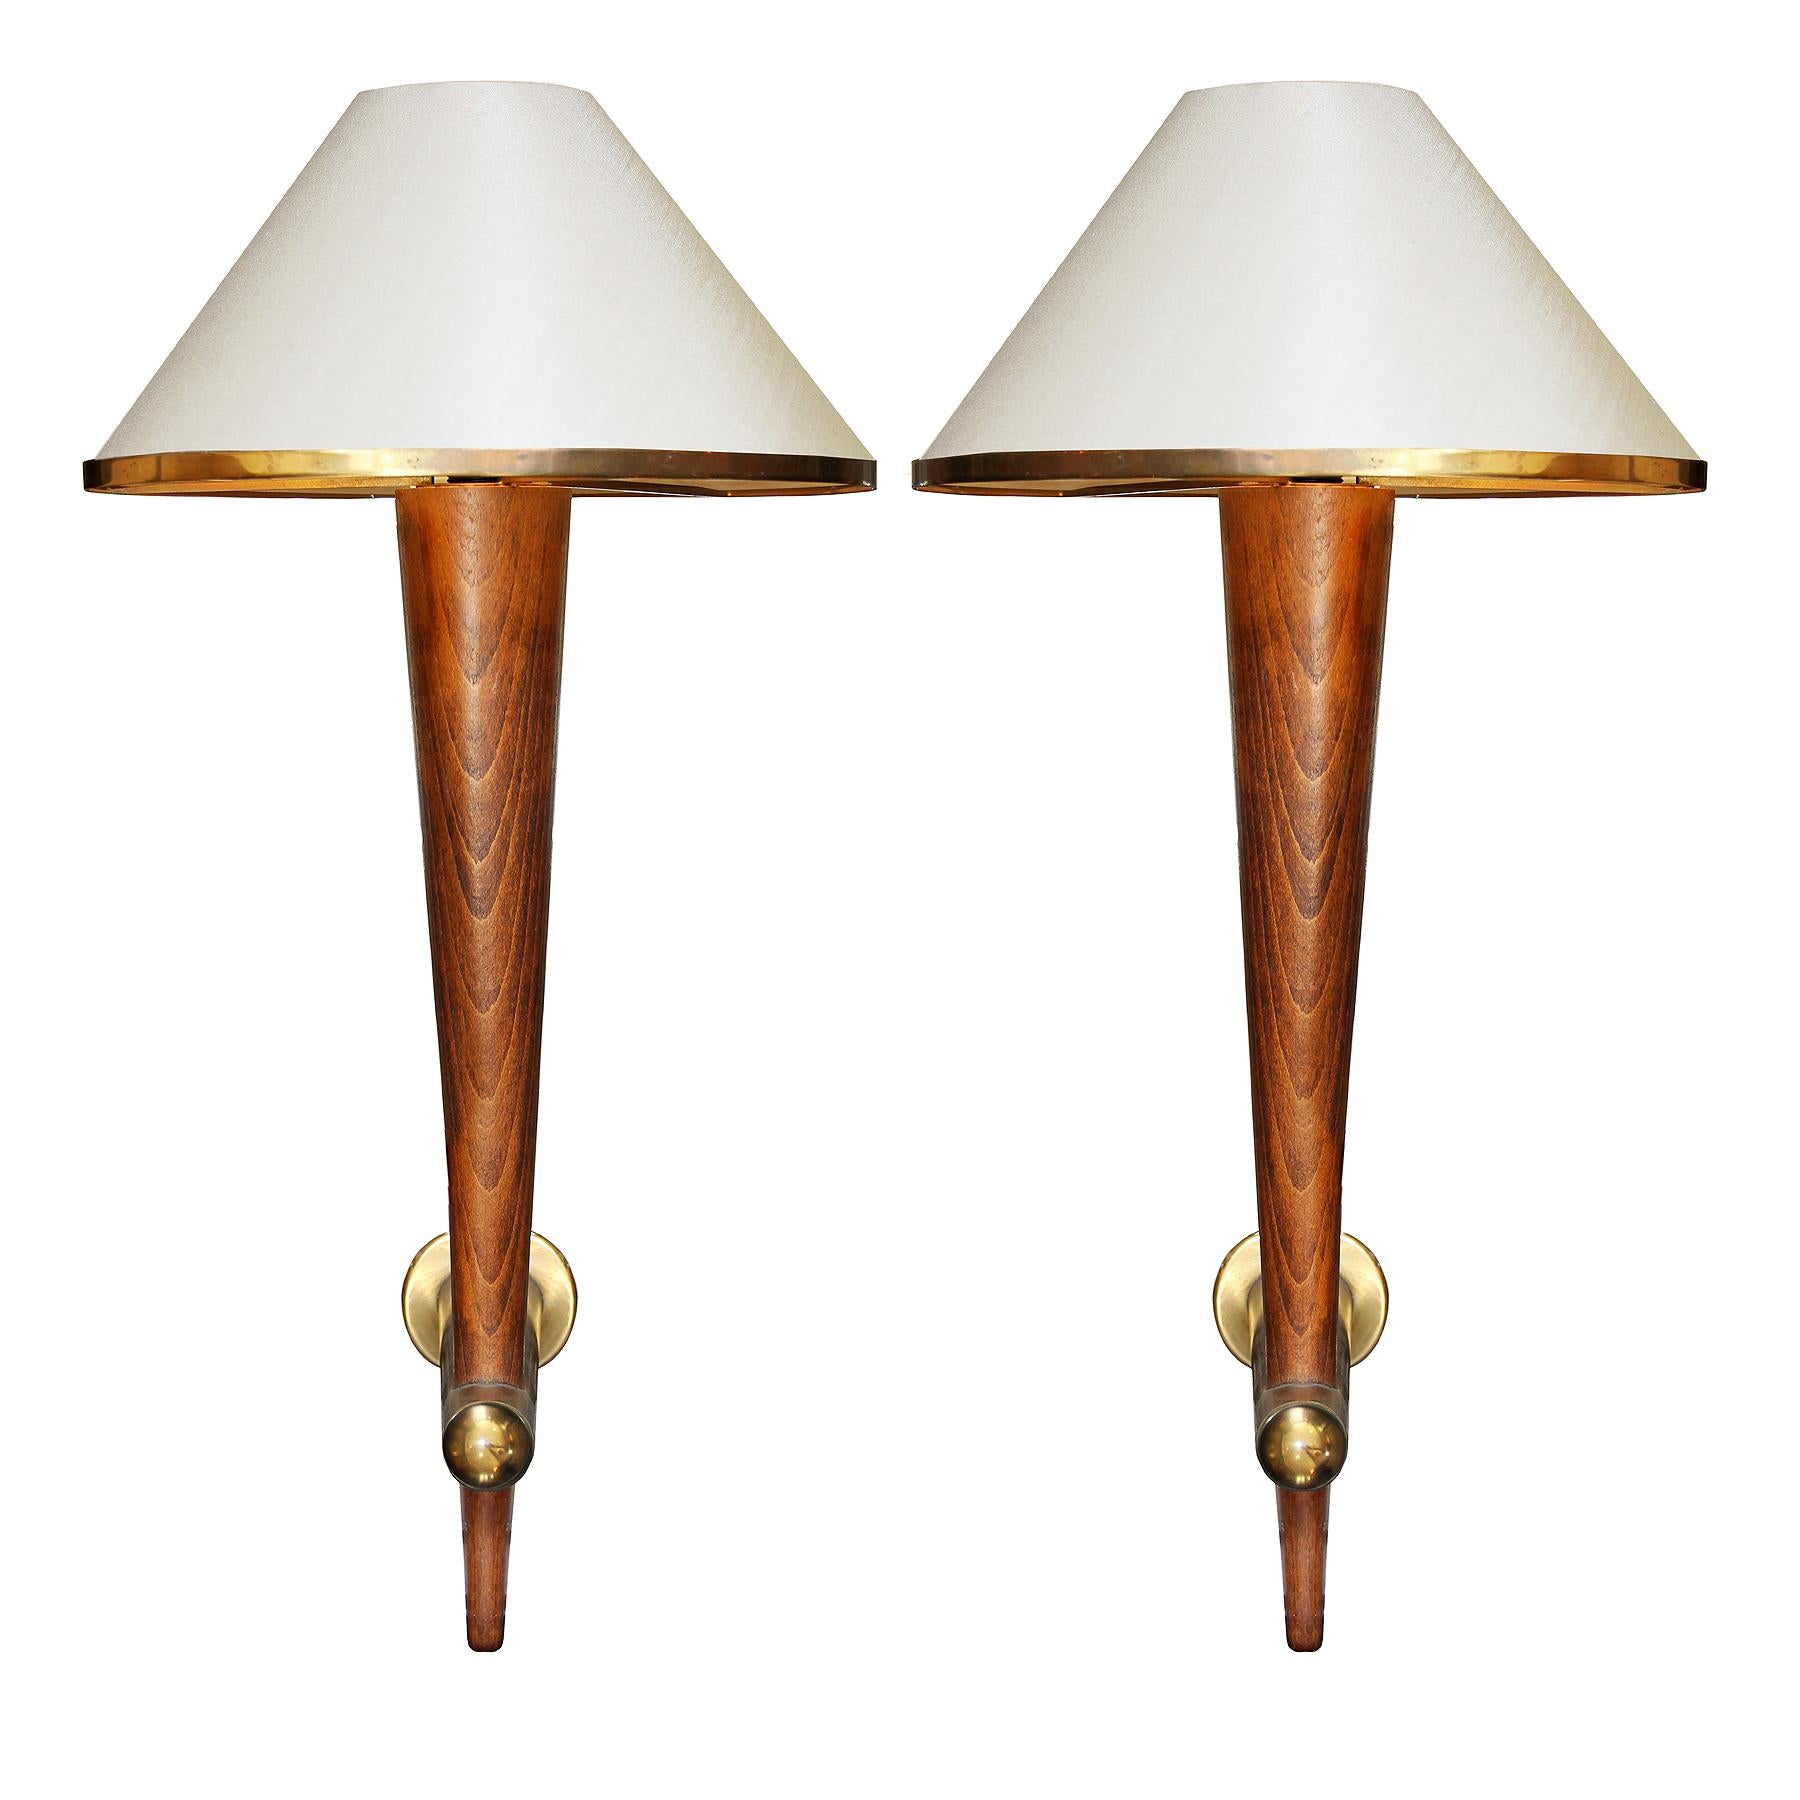 Rare set of FOUR sconces from a set of 16 we purchased from the Cafe Francais in Paris, France, circa 1970. 
The sconces are in patinated beech wood, brass arms and frames and circular frosted glass reflectors.
Lampshades are in ivory Pongee fabric